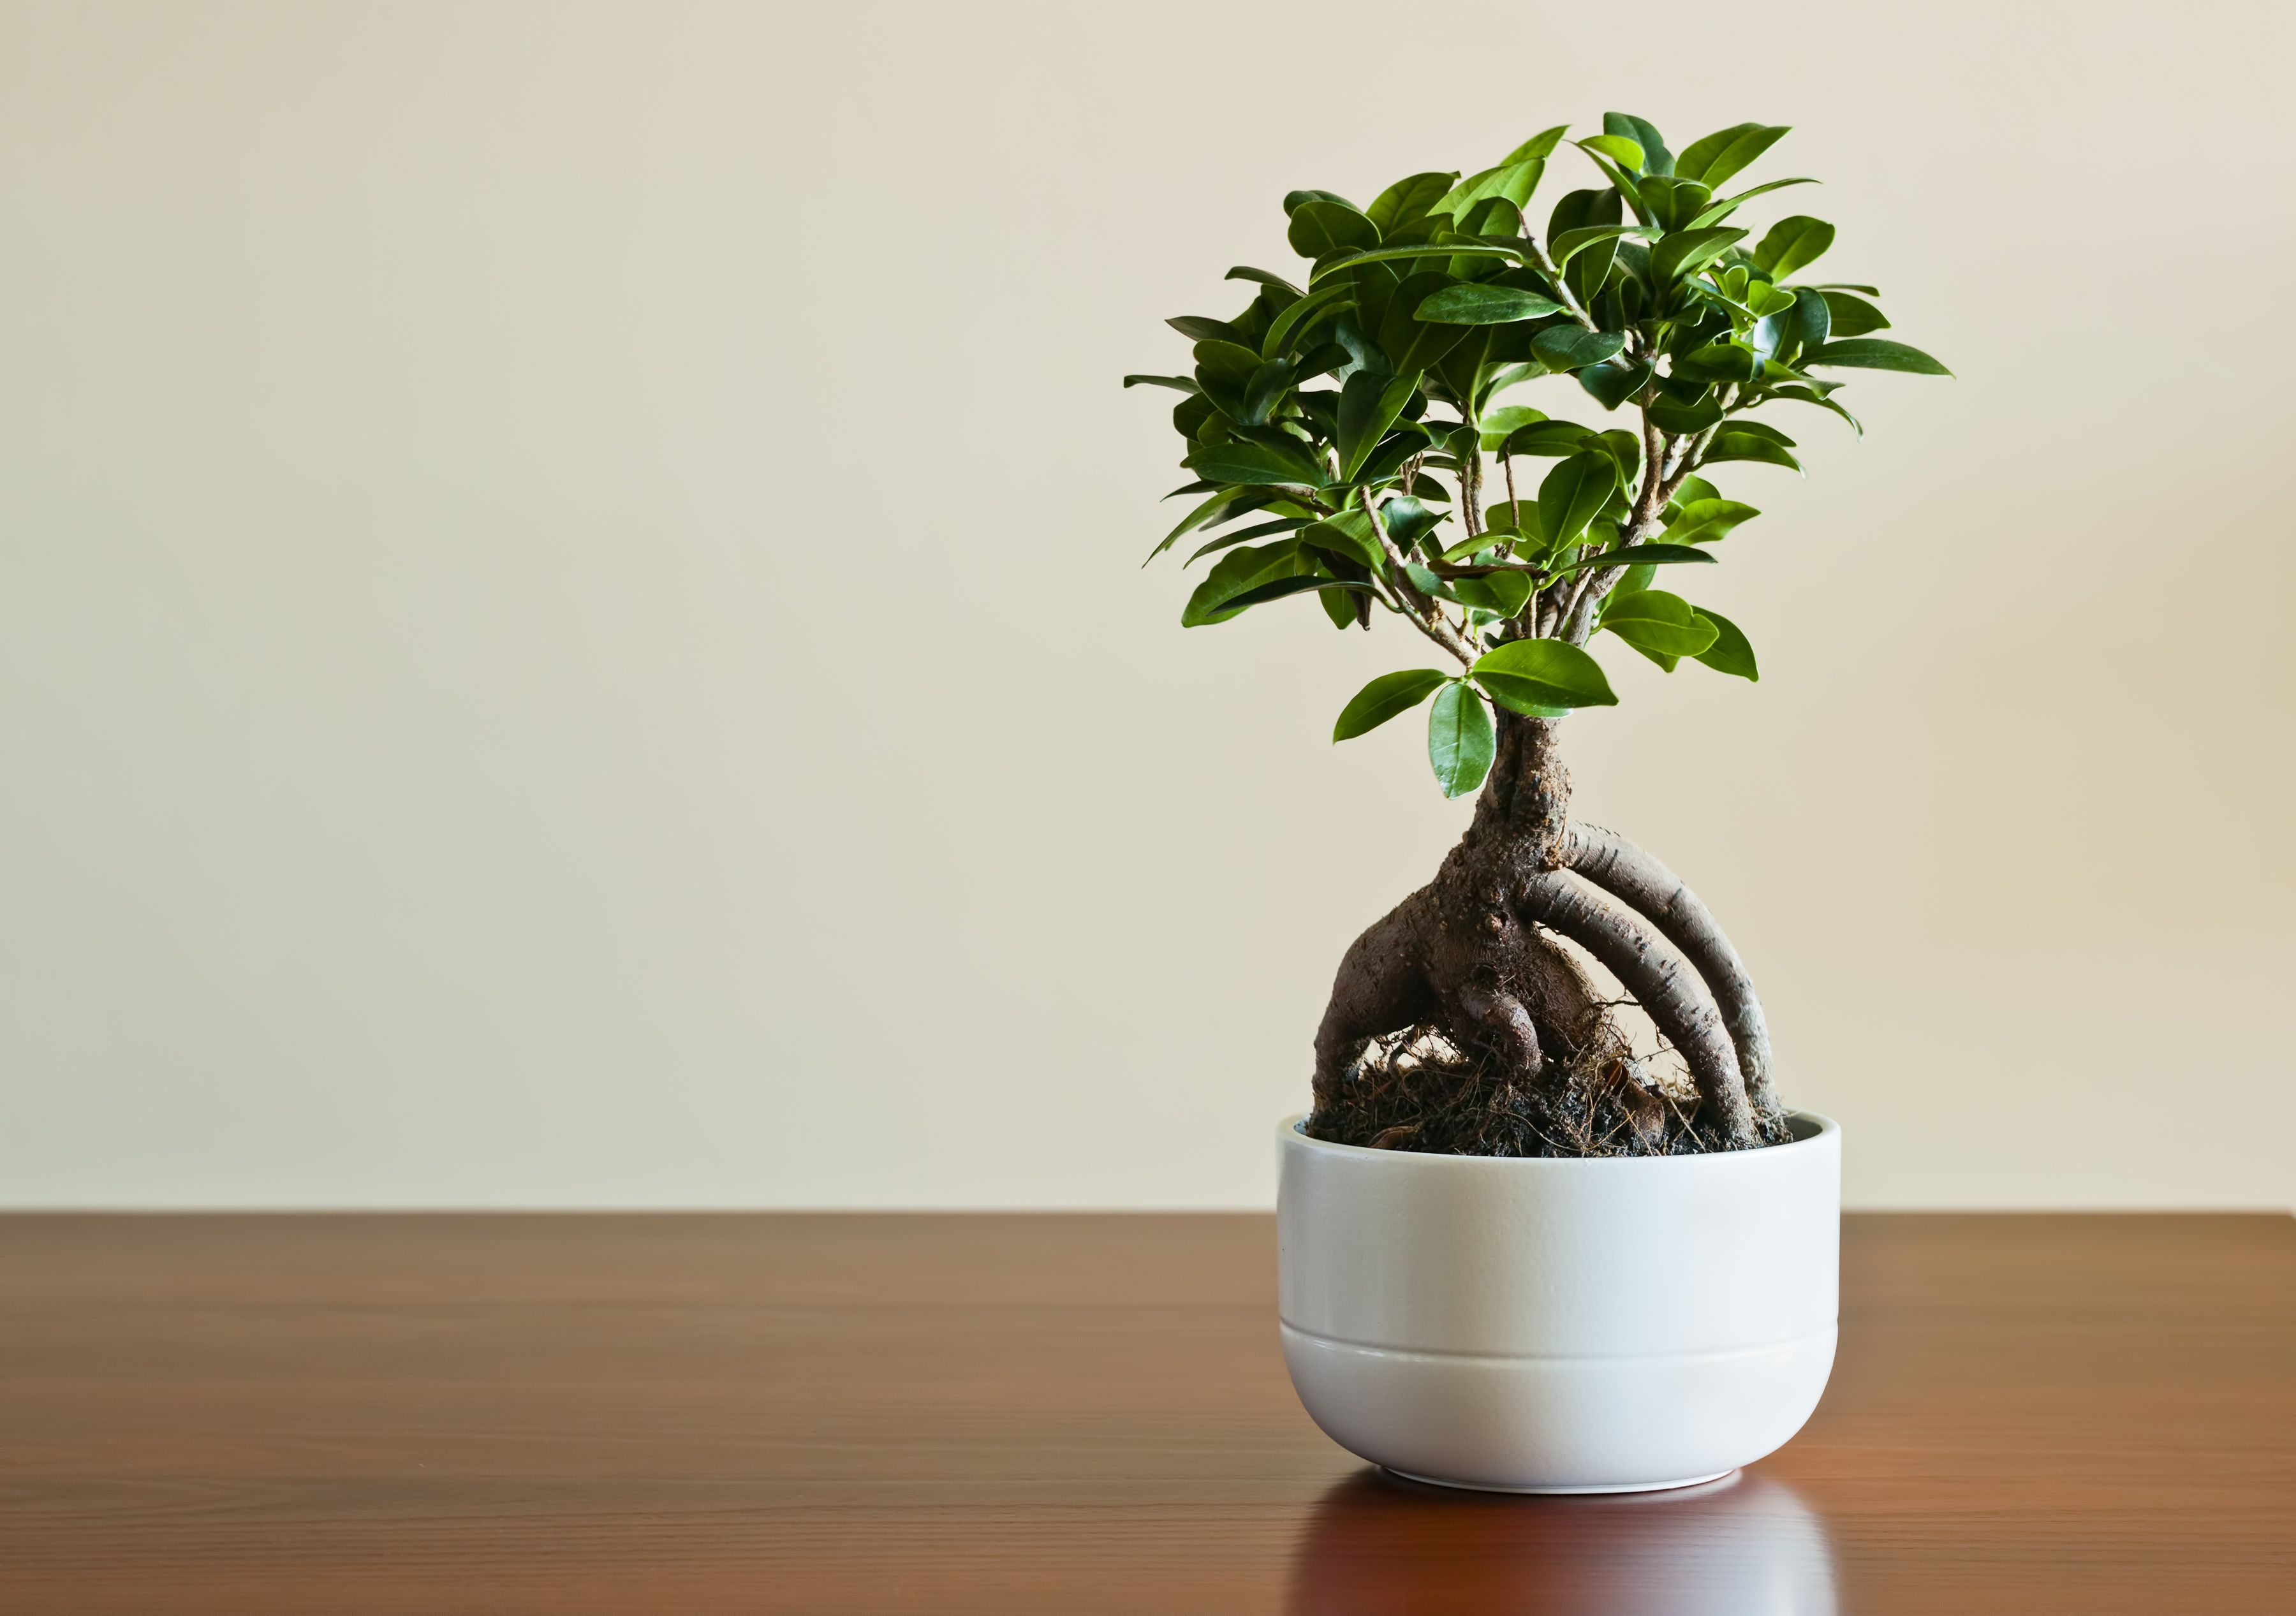 How Tall Will my Bonsai Tree Grow? - Learn how to control the size